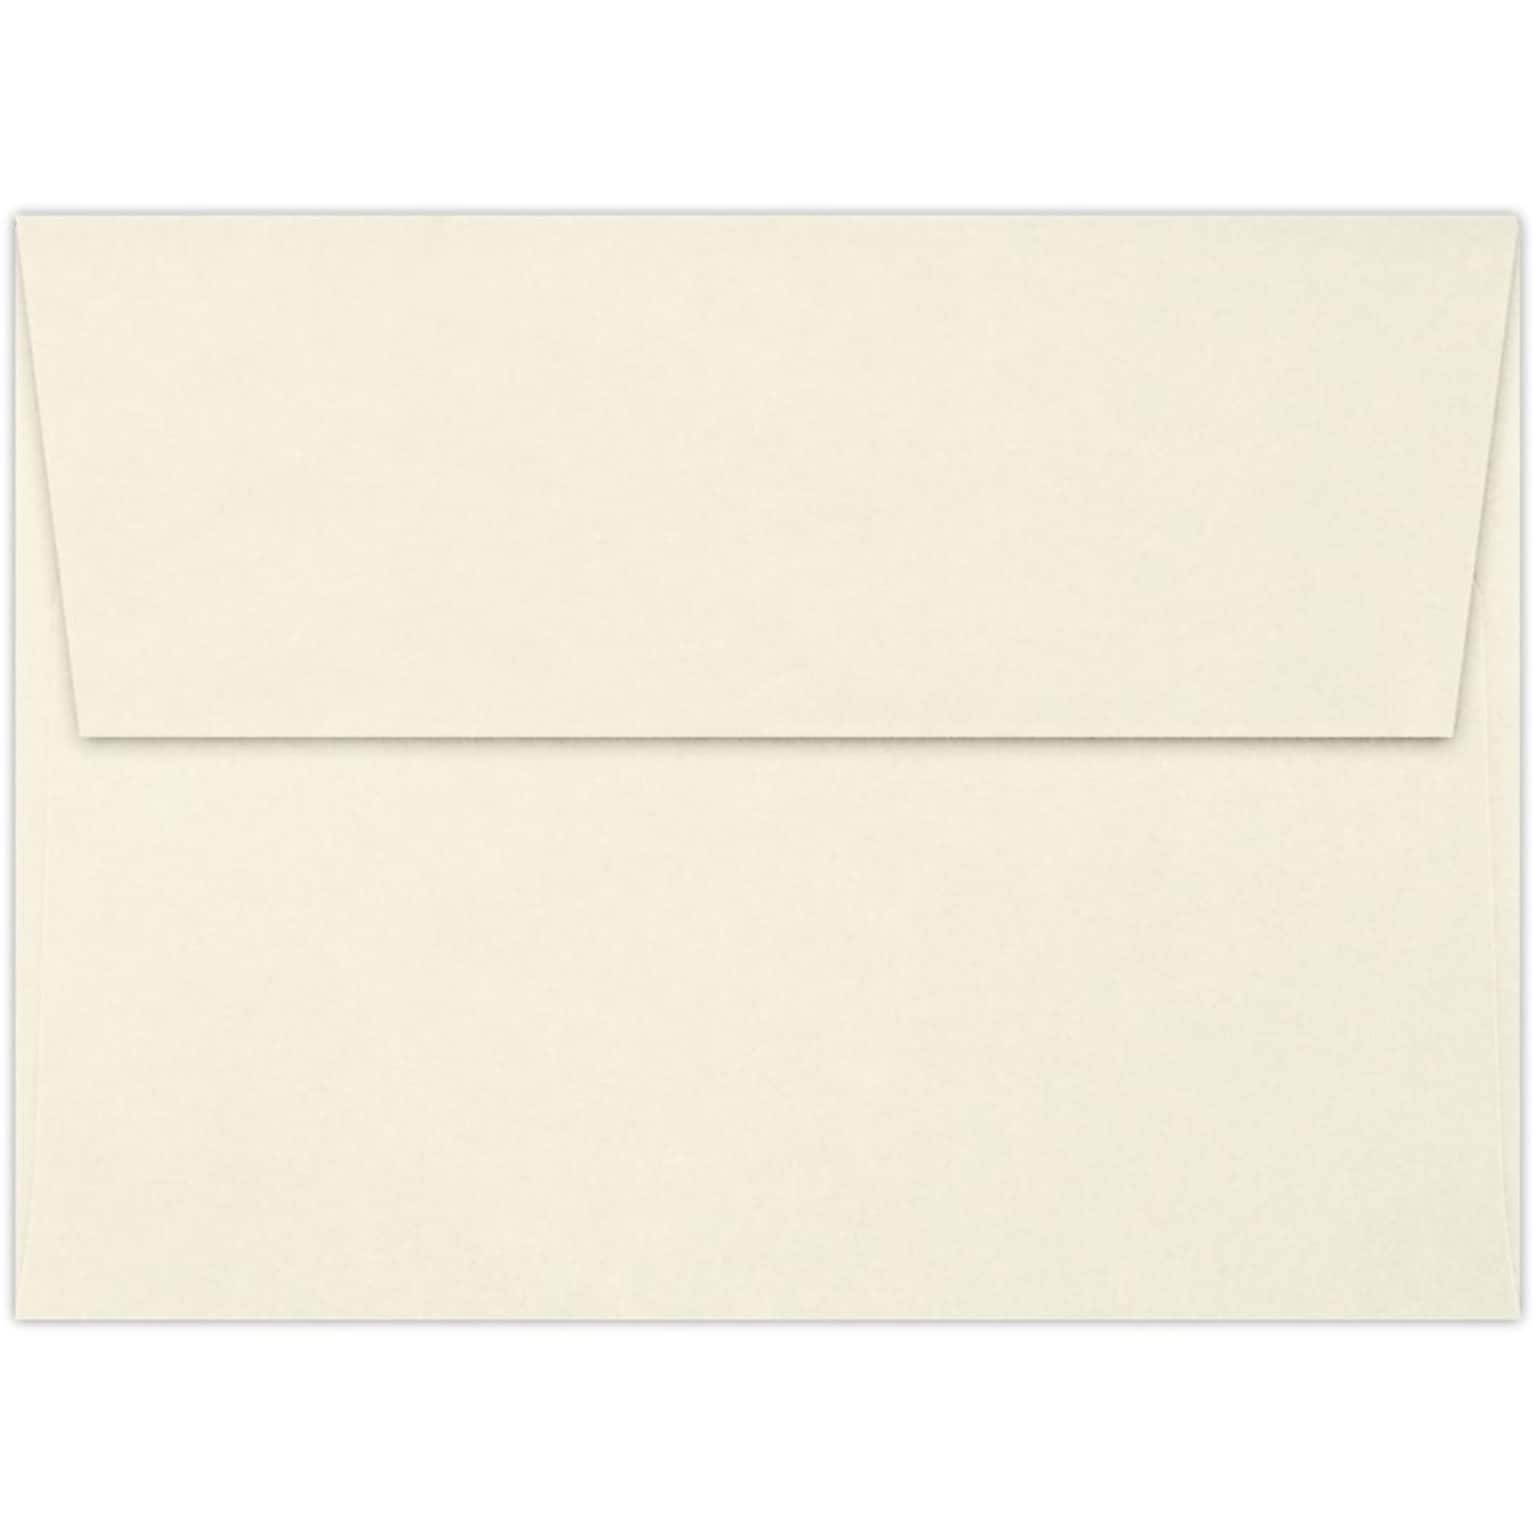 LUX A6 Invitation Envelopes (4 3/4 x 6 1/2) 50/Pack, 70lb. Classic Crest® Natural White (4875-70NW-50)